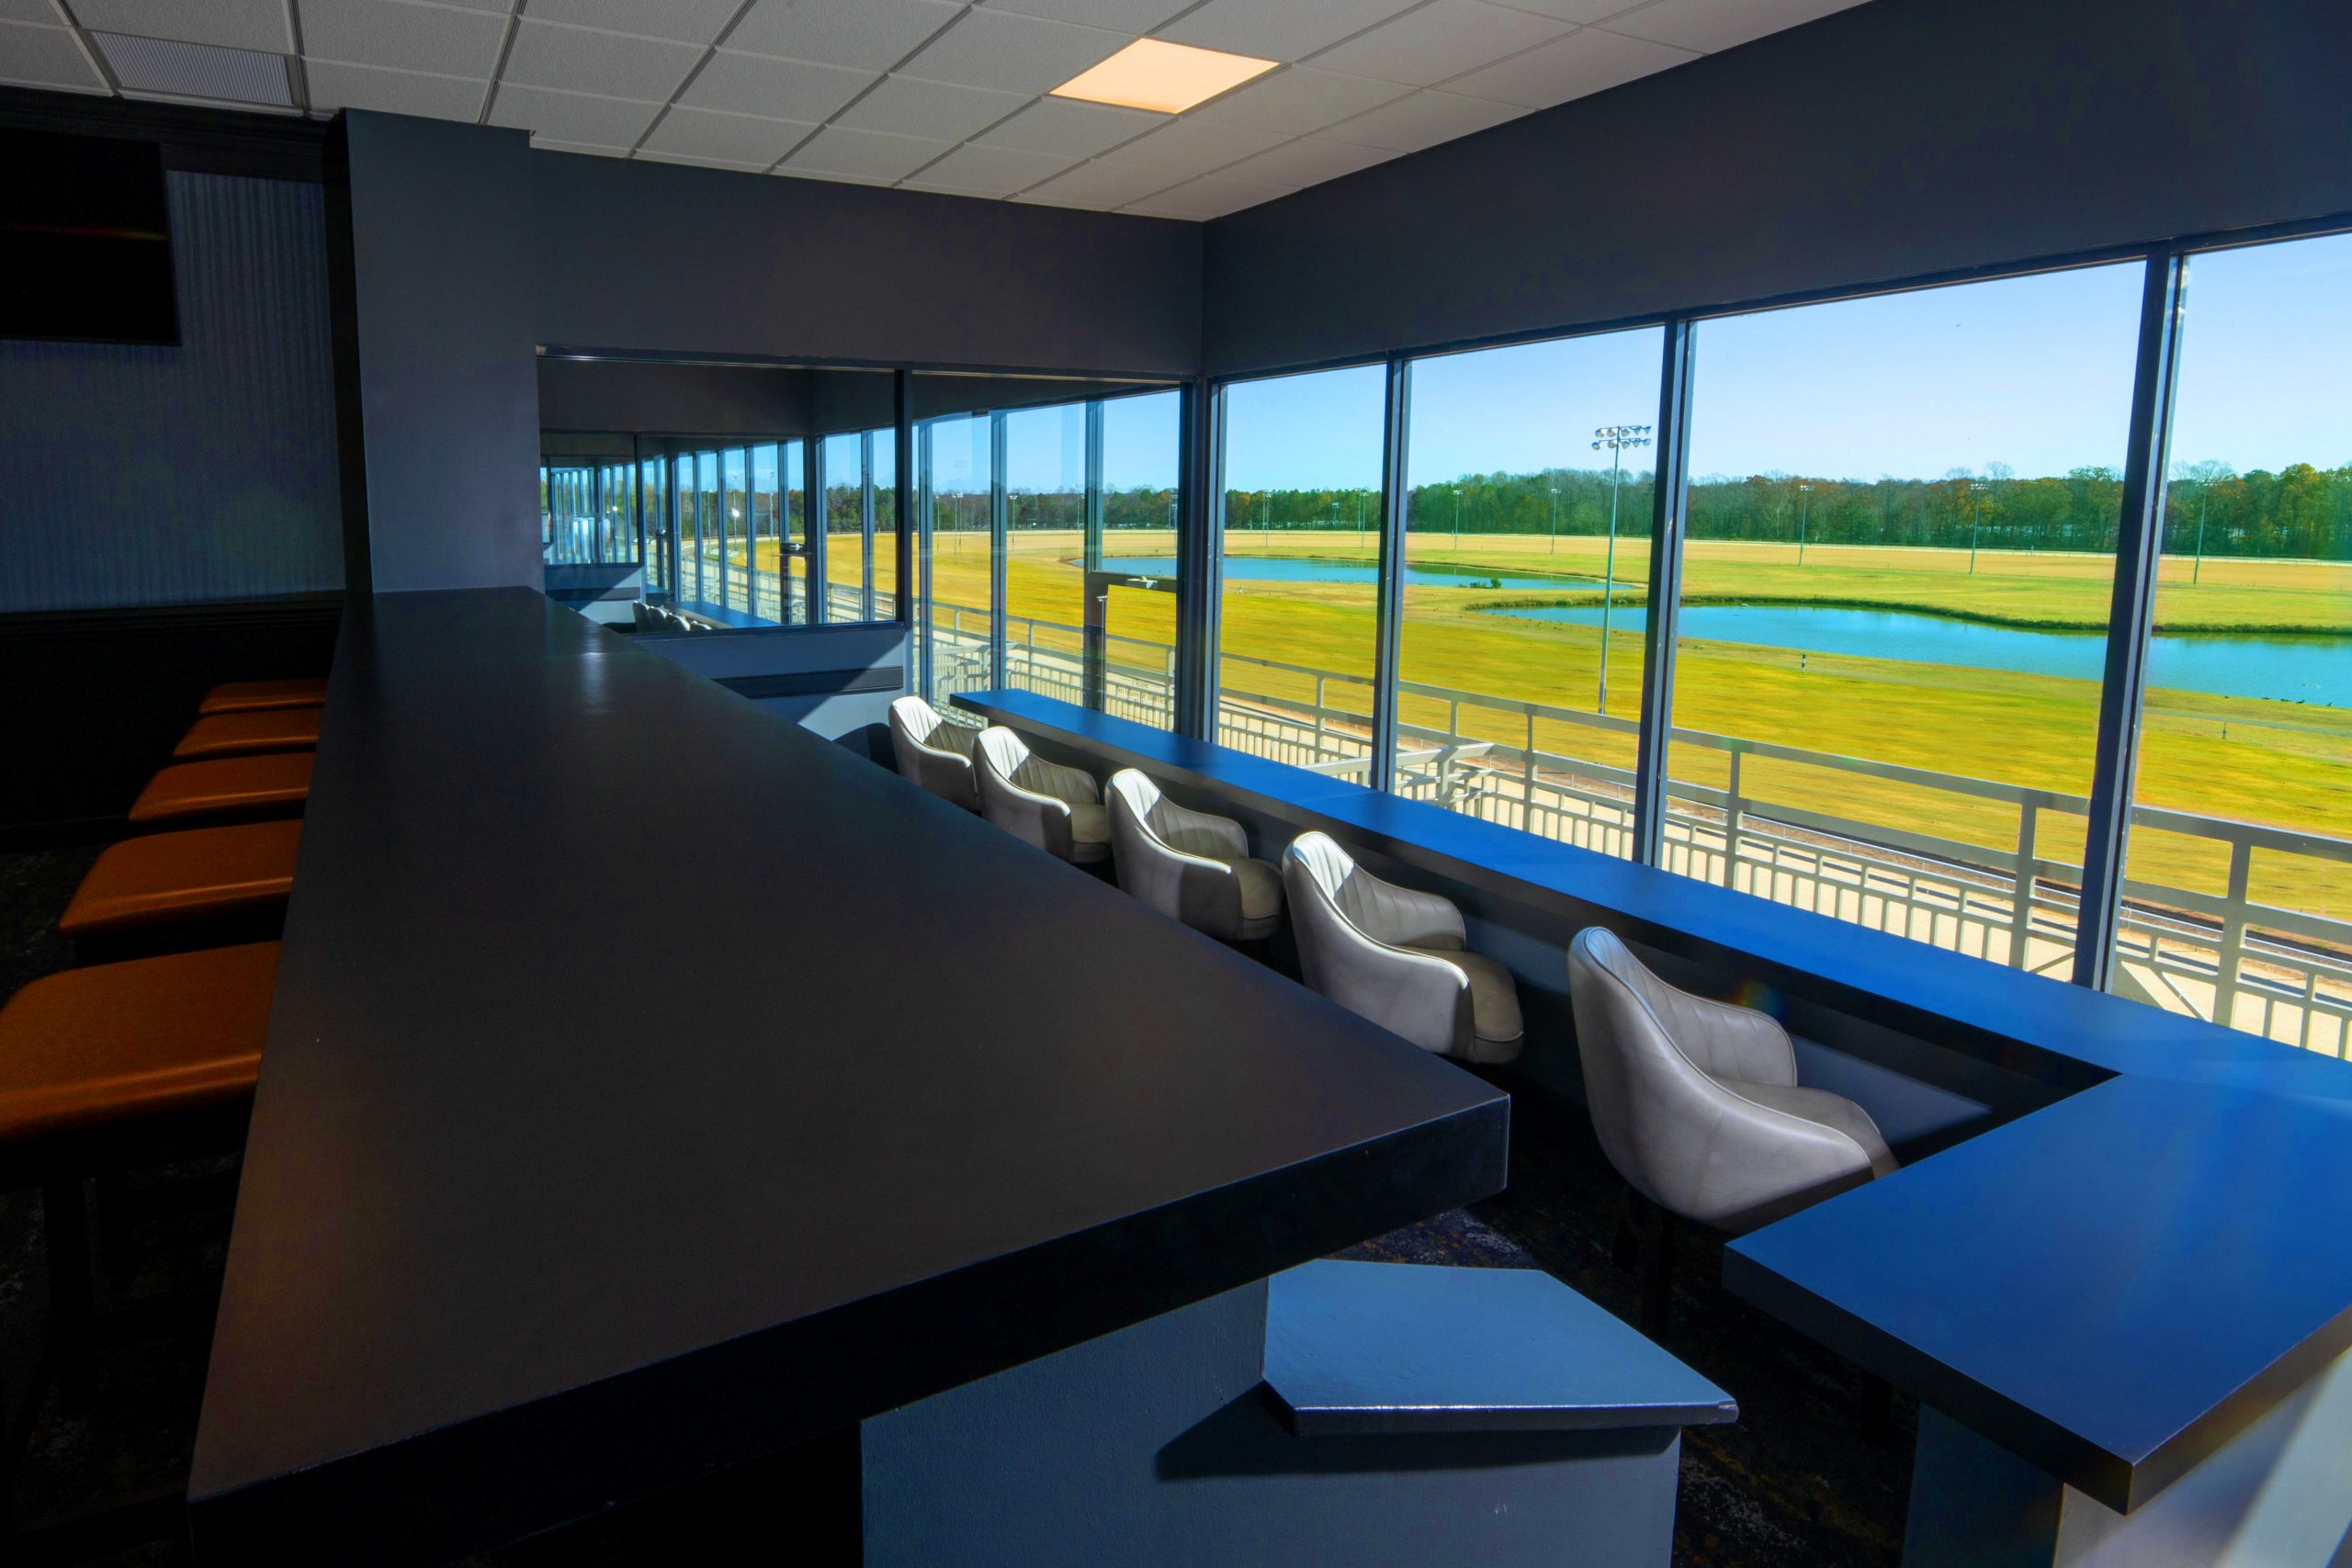 interior seating looking out on race track